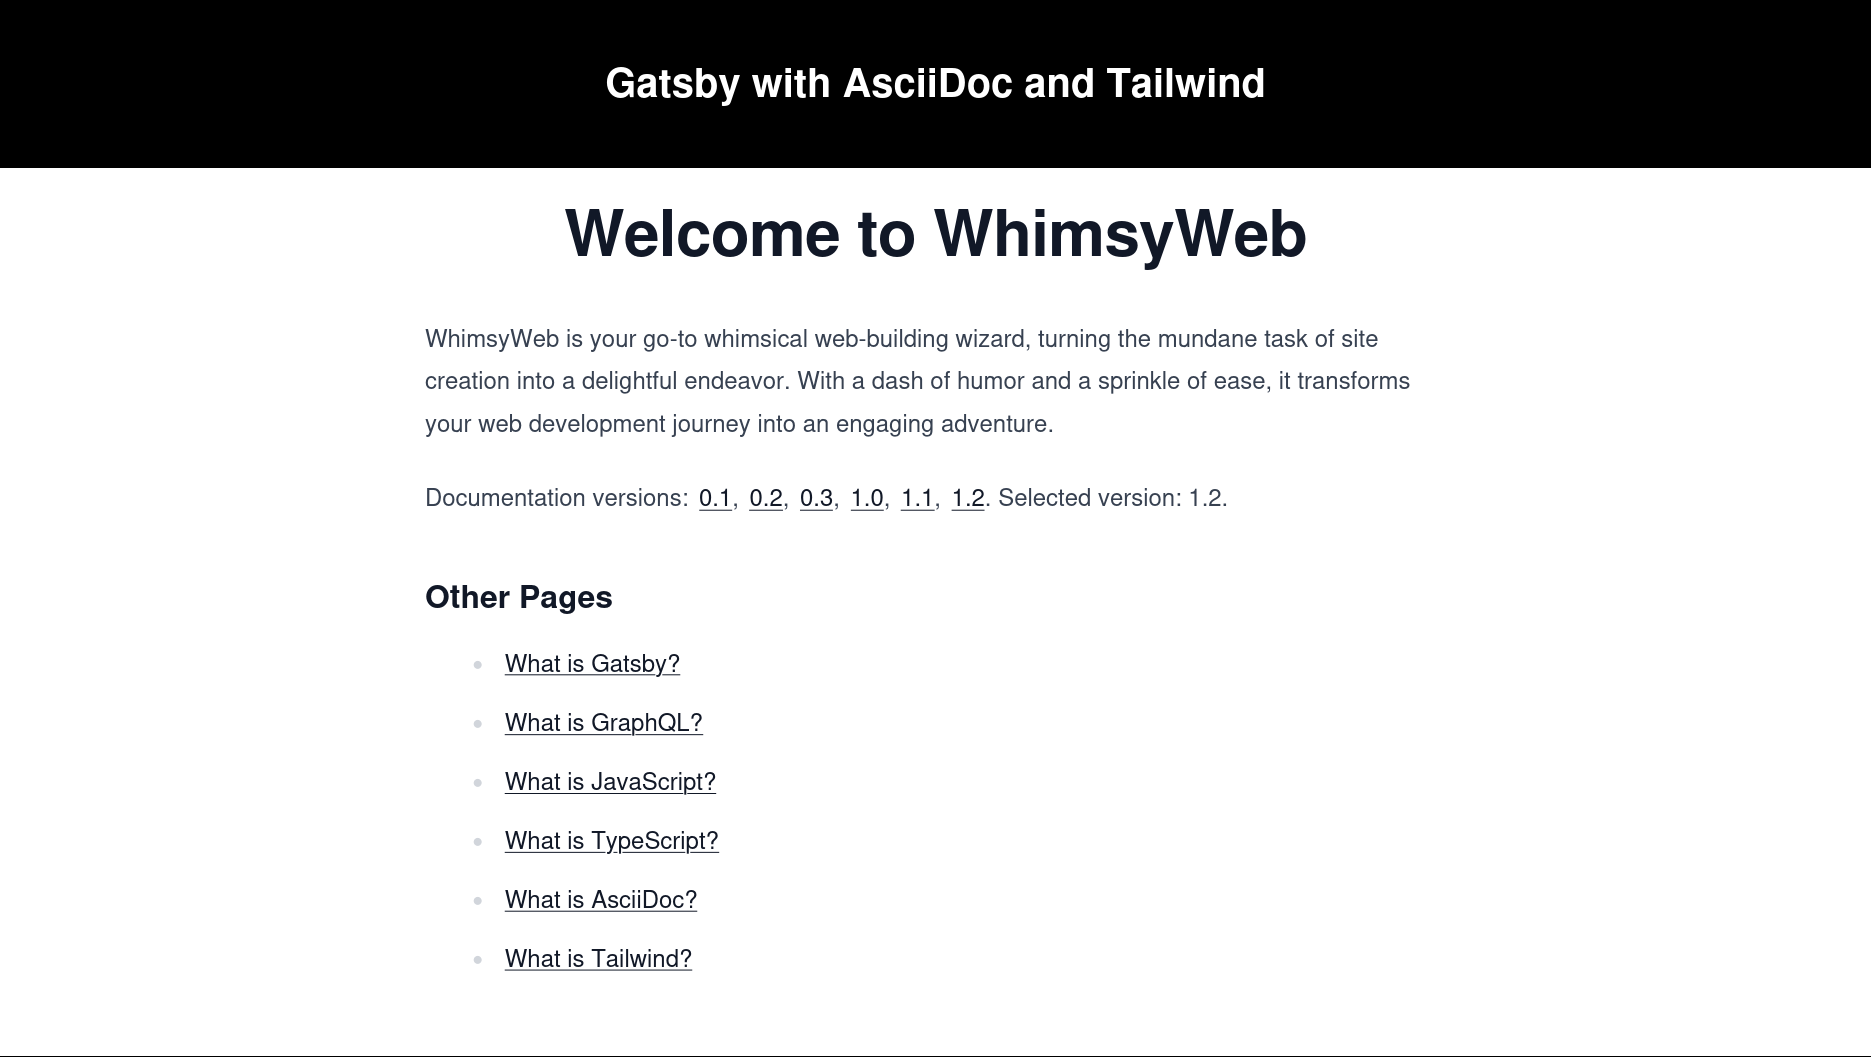 WhimsyWeb landing page for version 1.2.